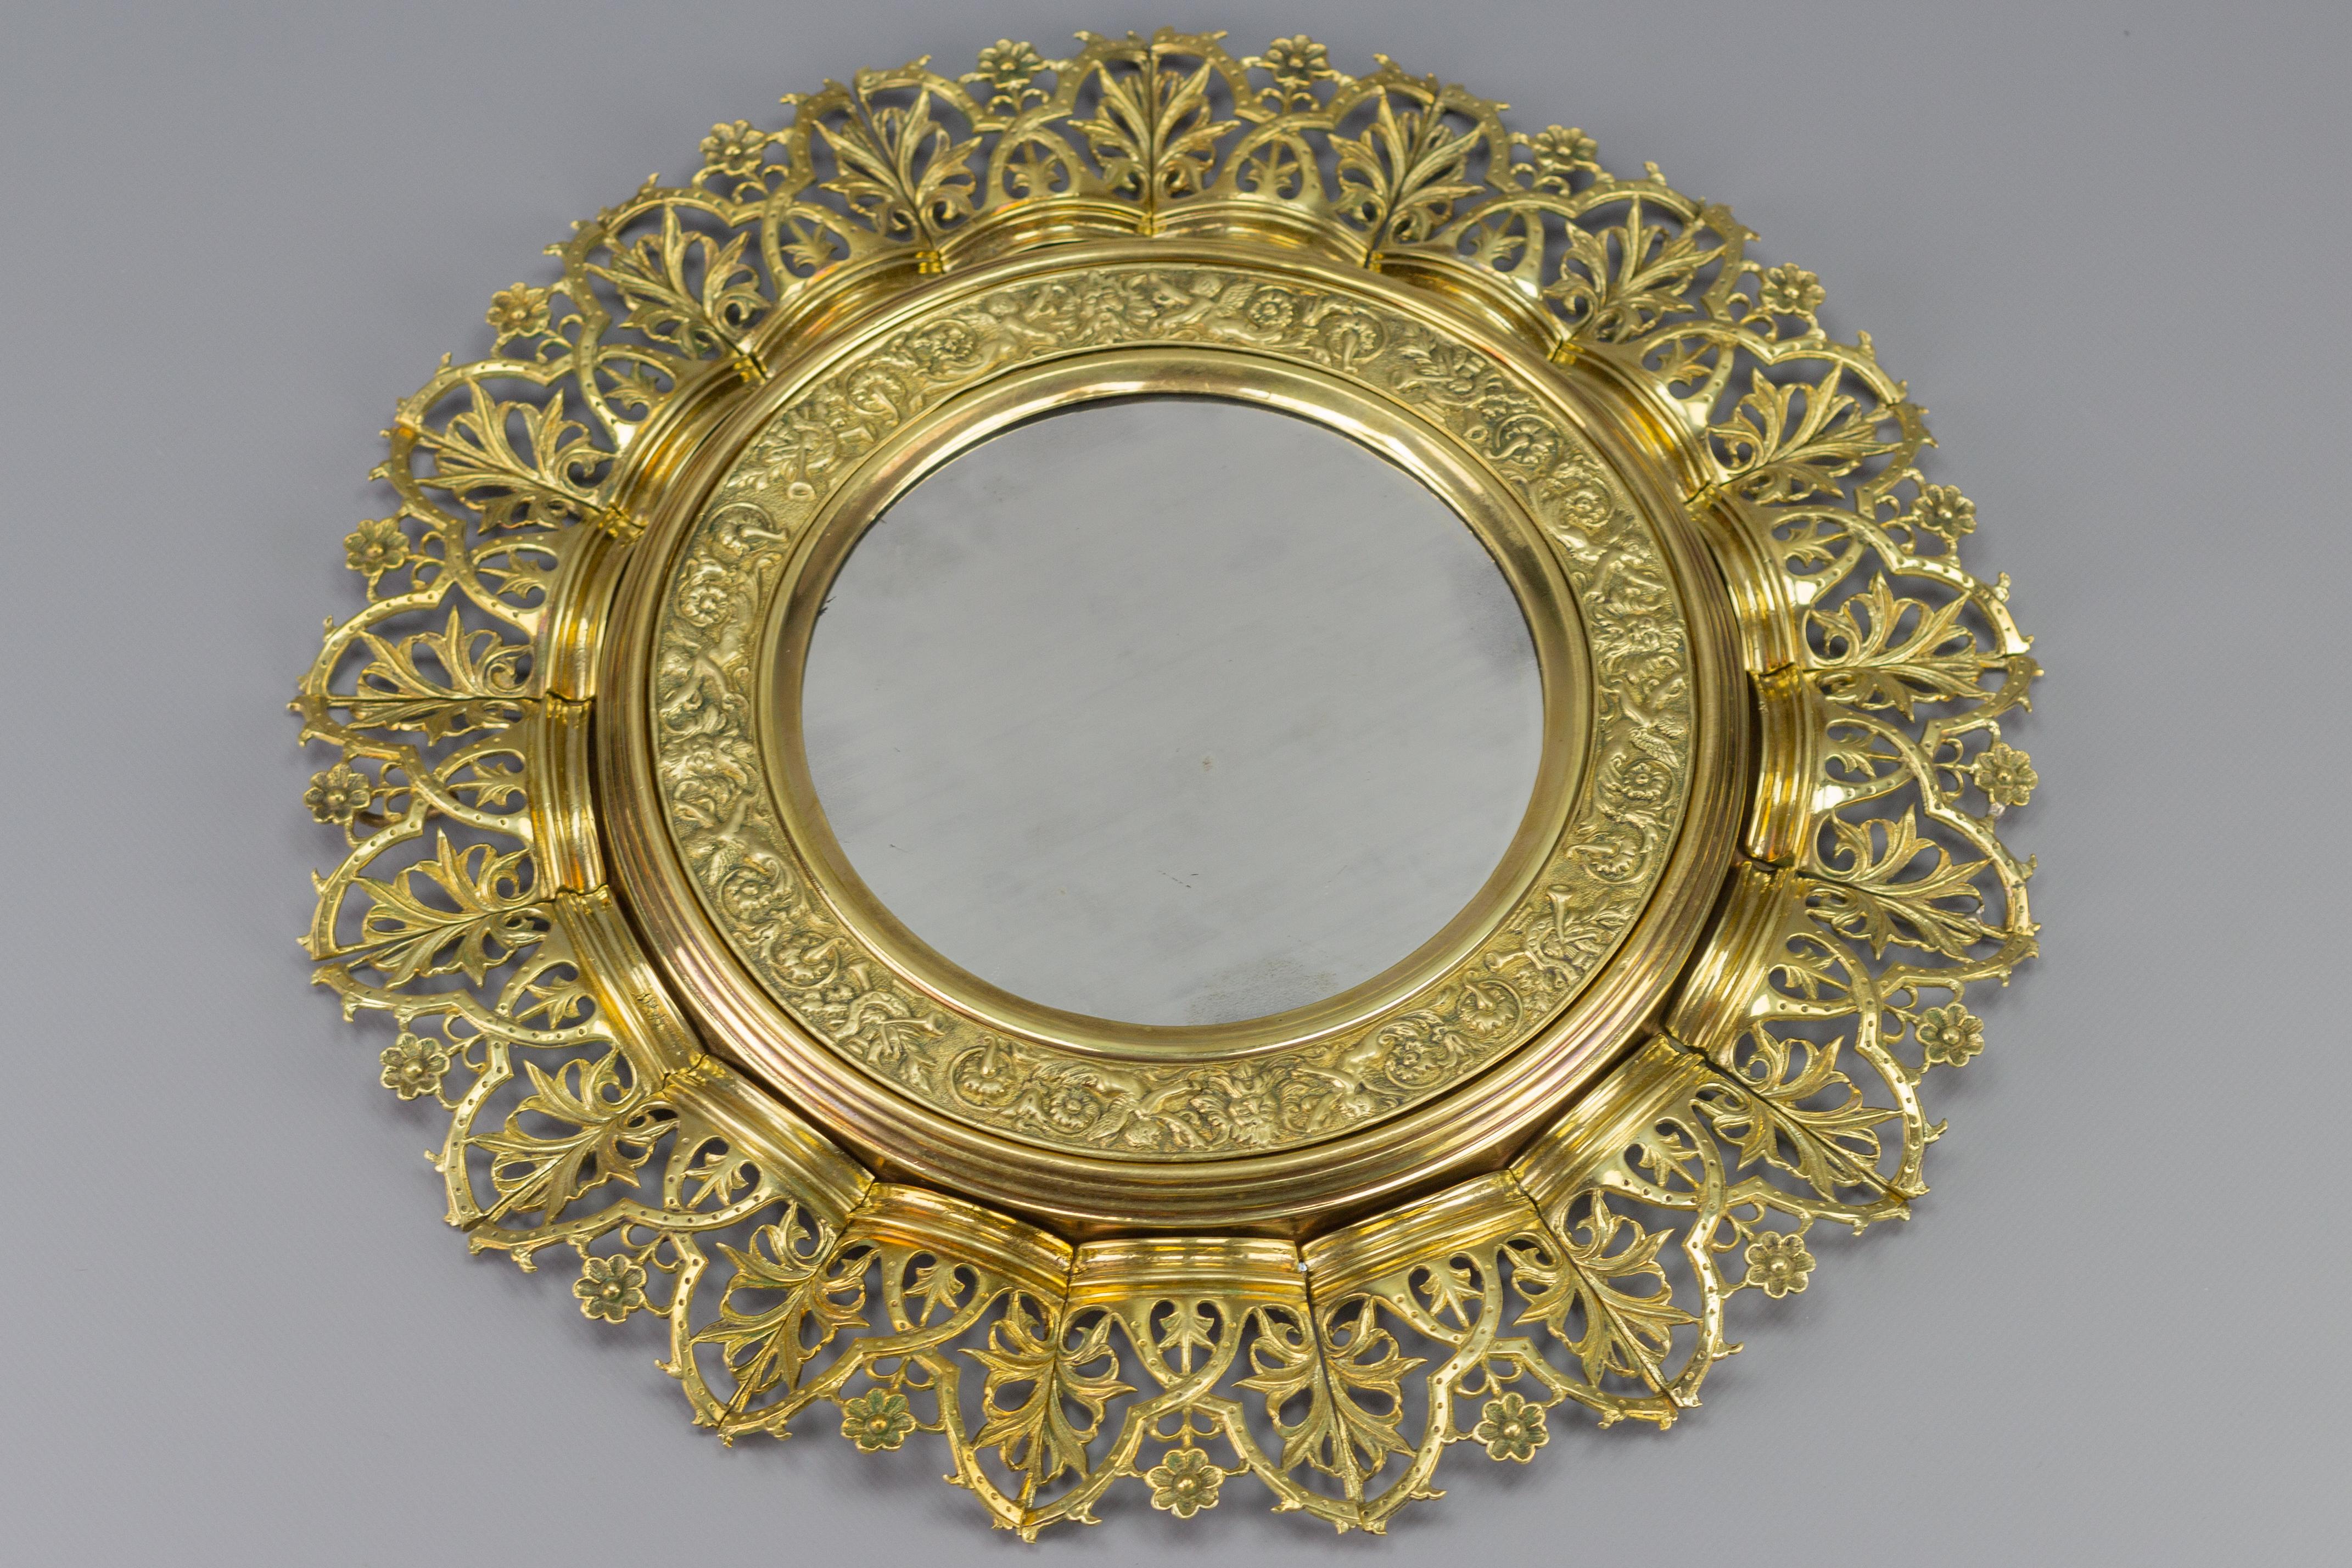 A stunning circular wall mirror in a sunburst shape. This antique mirror features an embossed brass and bronze frame that is richly decorated with beautiful neoclassical details such as putti, flower, and leaf motifs. Crown-like elements in the